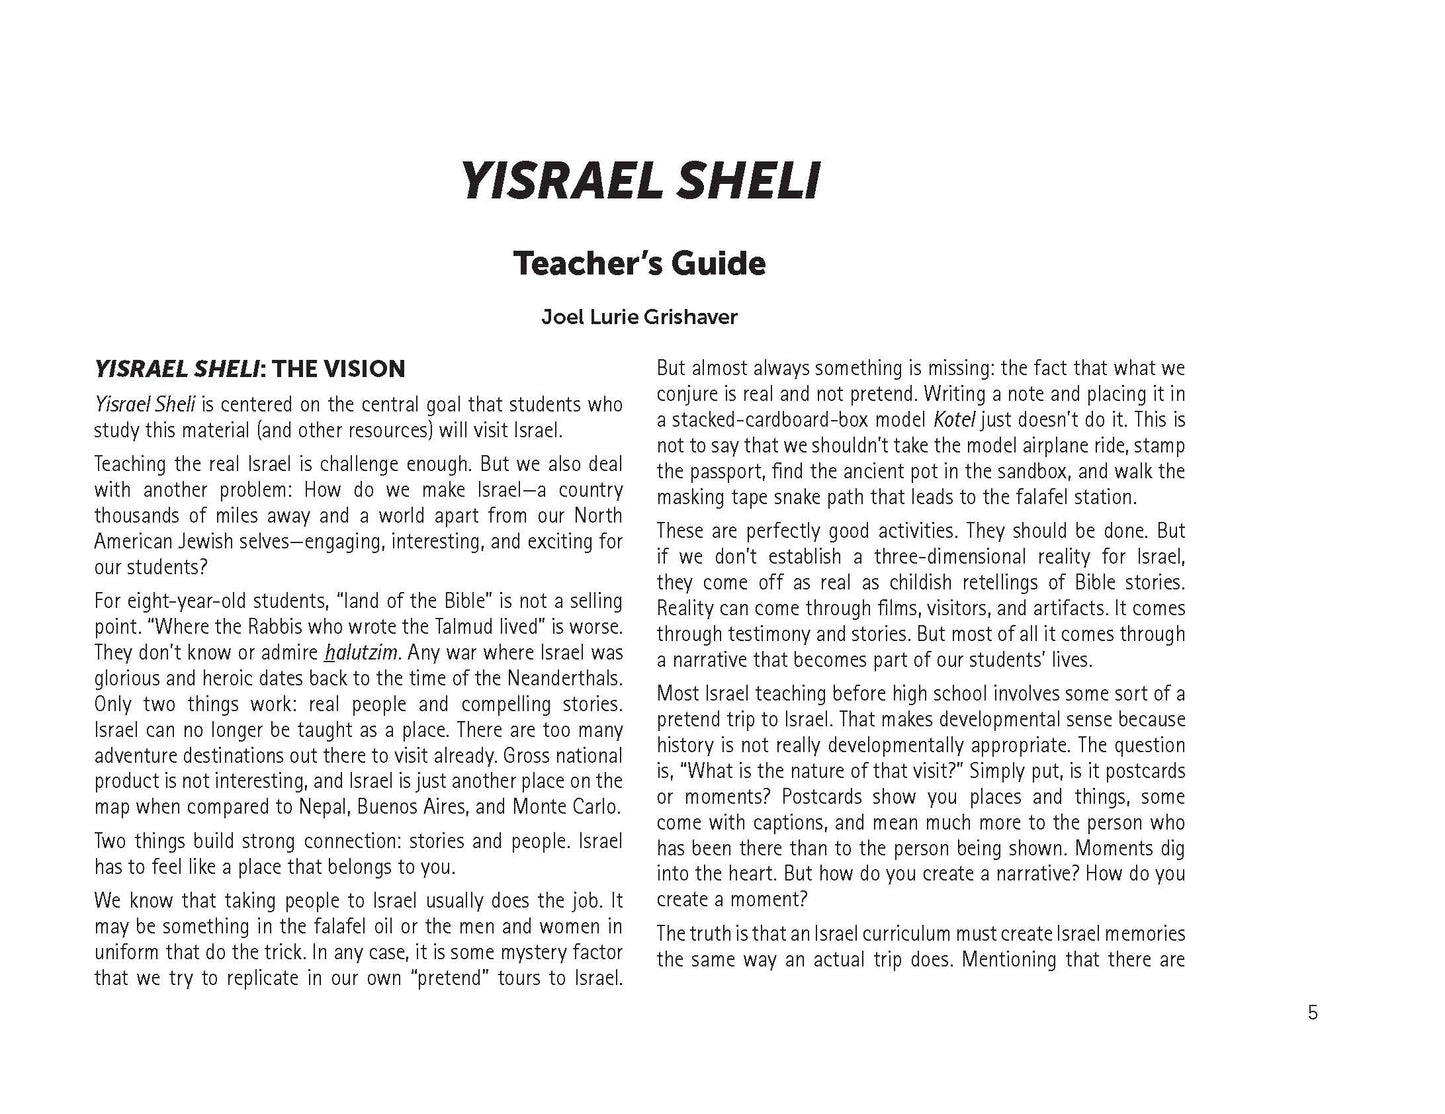 Yisrael Sheli: My Israel People and Places Teacher Guide